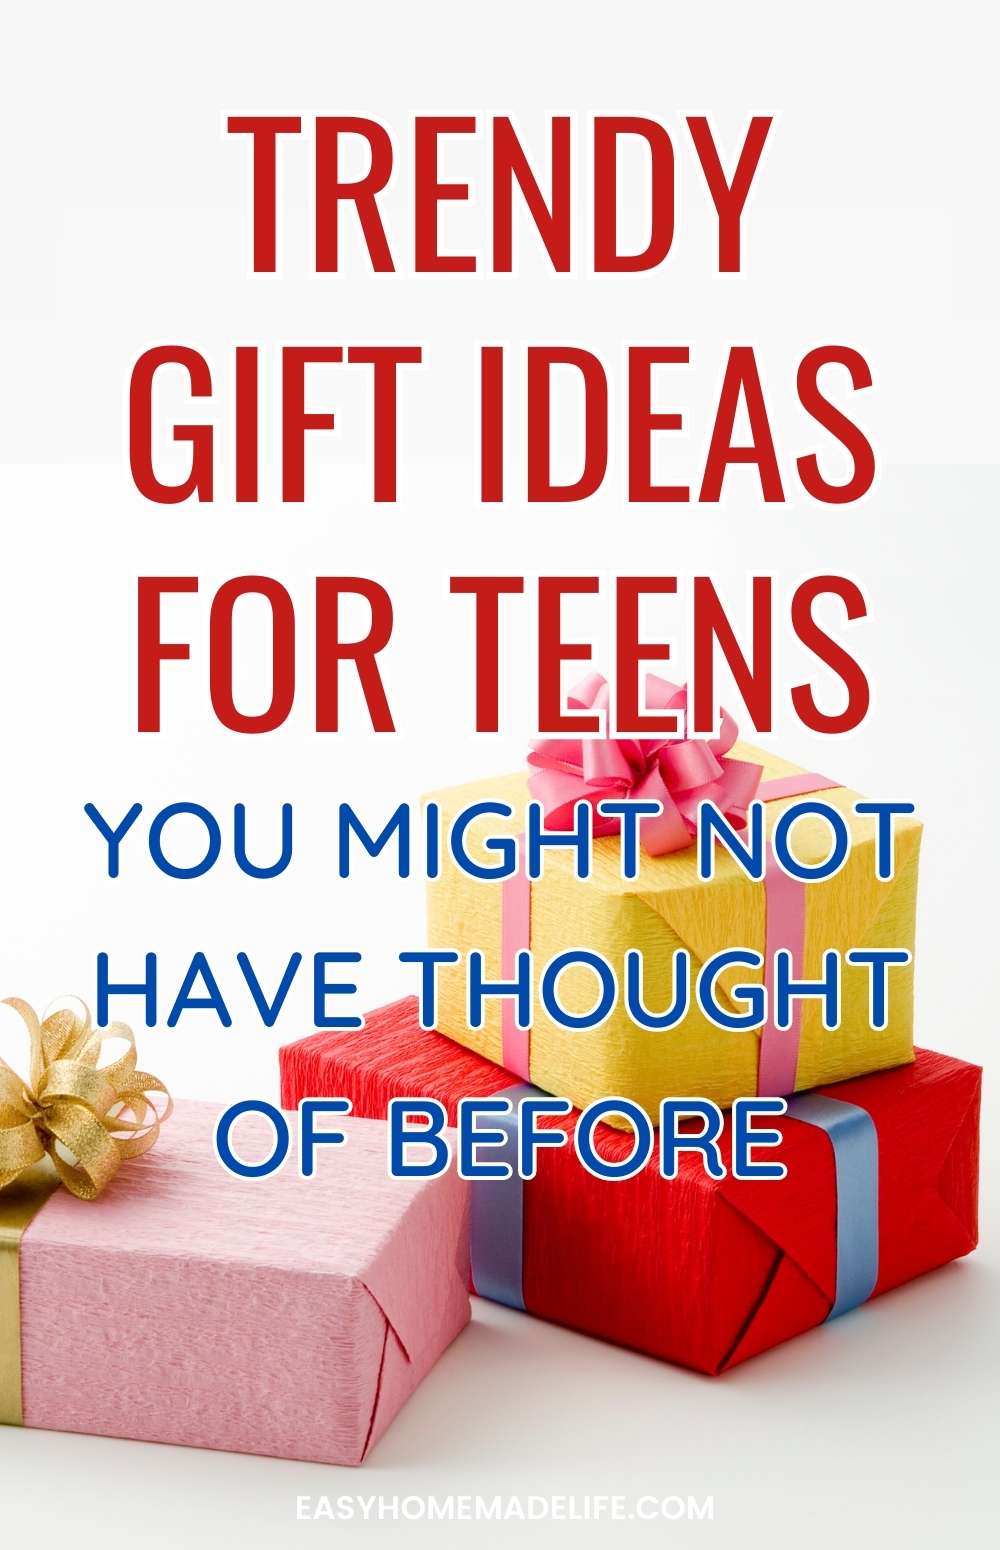 Trendy gift ideas for teens you might not have thought of before.